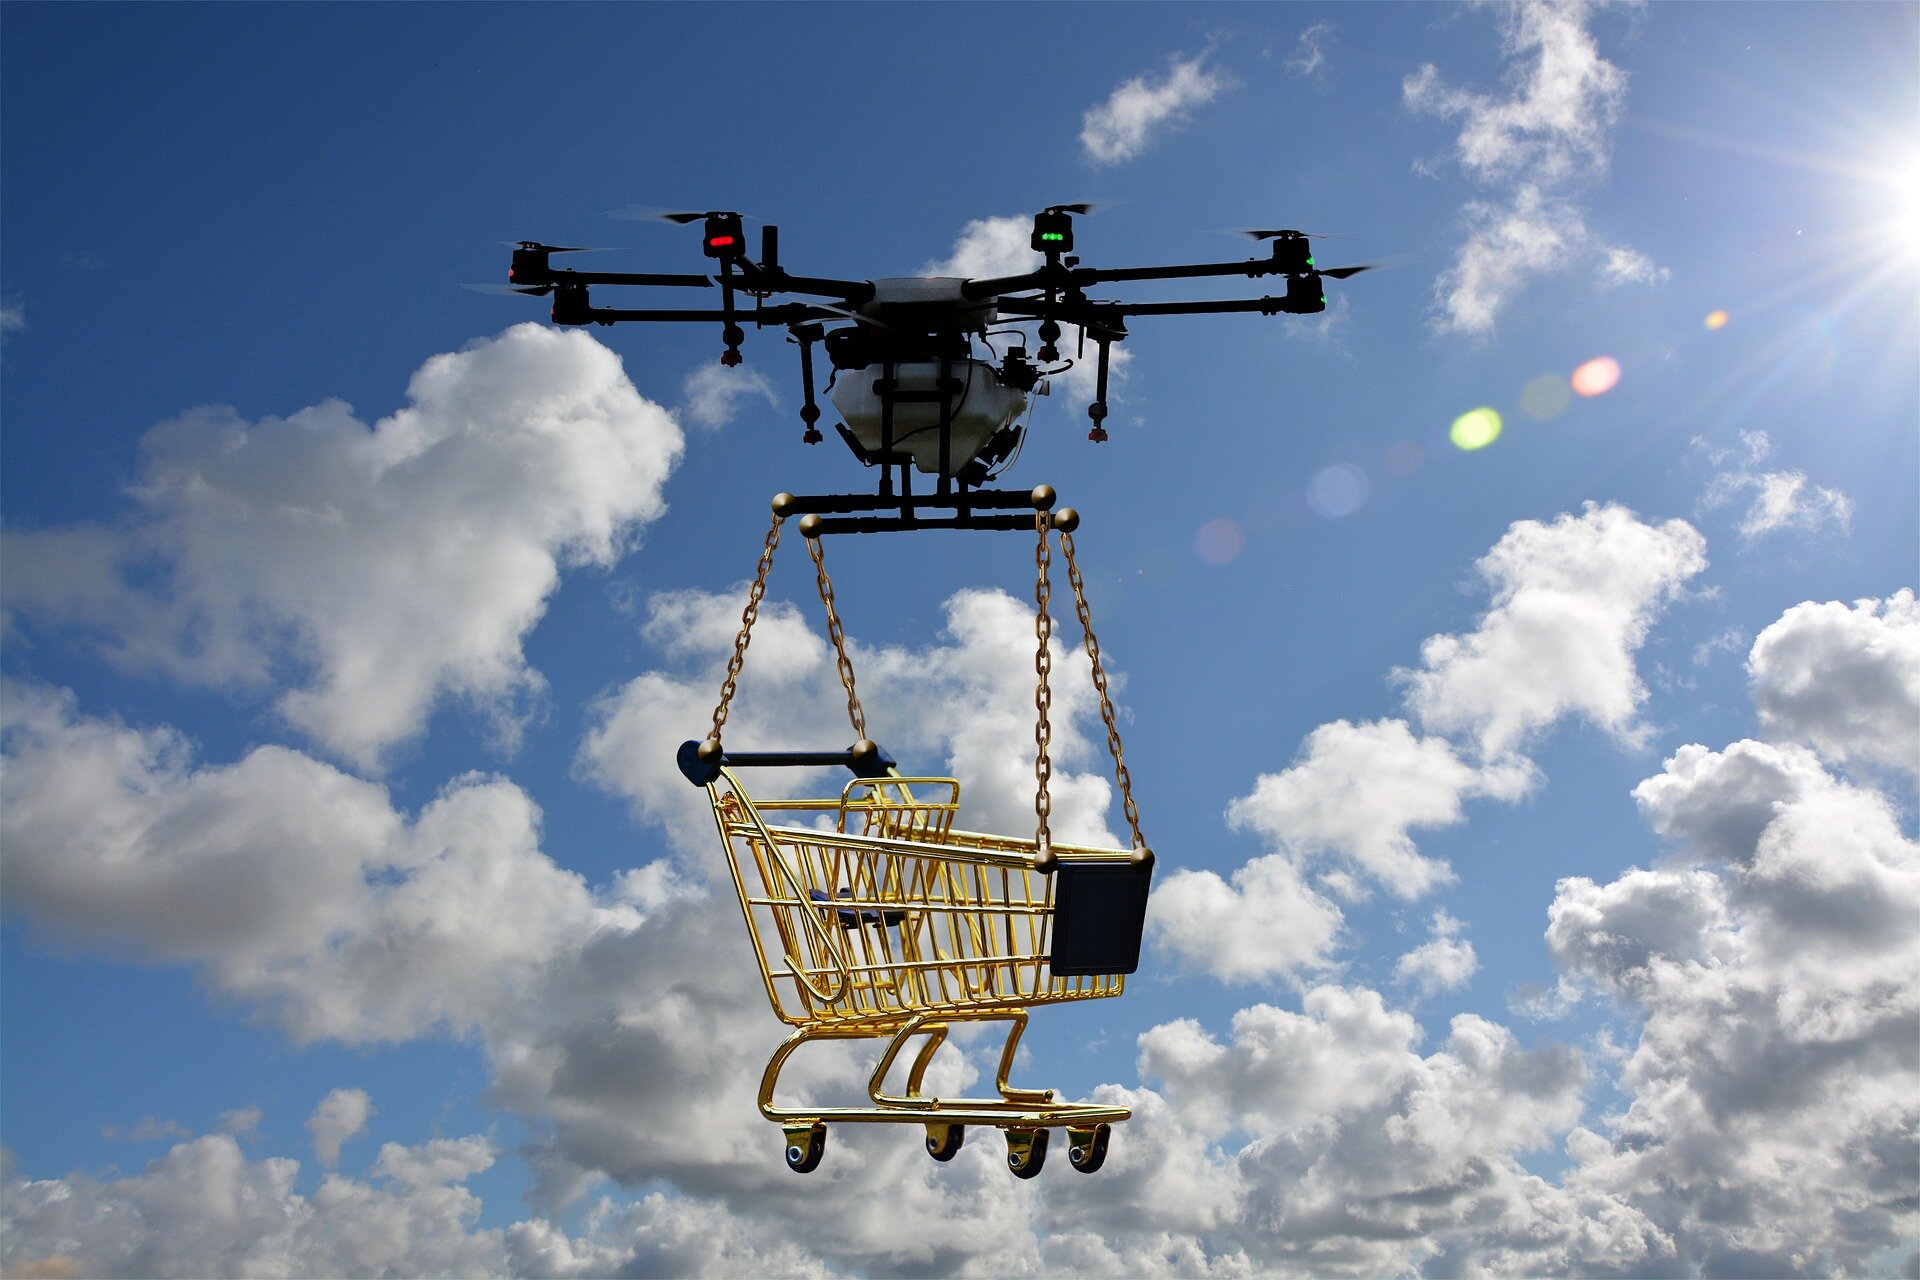 Study found consumers are more prepared for automated vehicle delivery than drones or robots